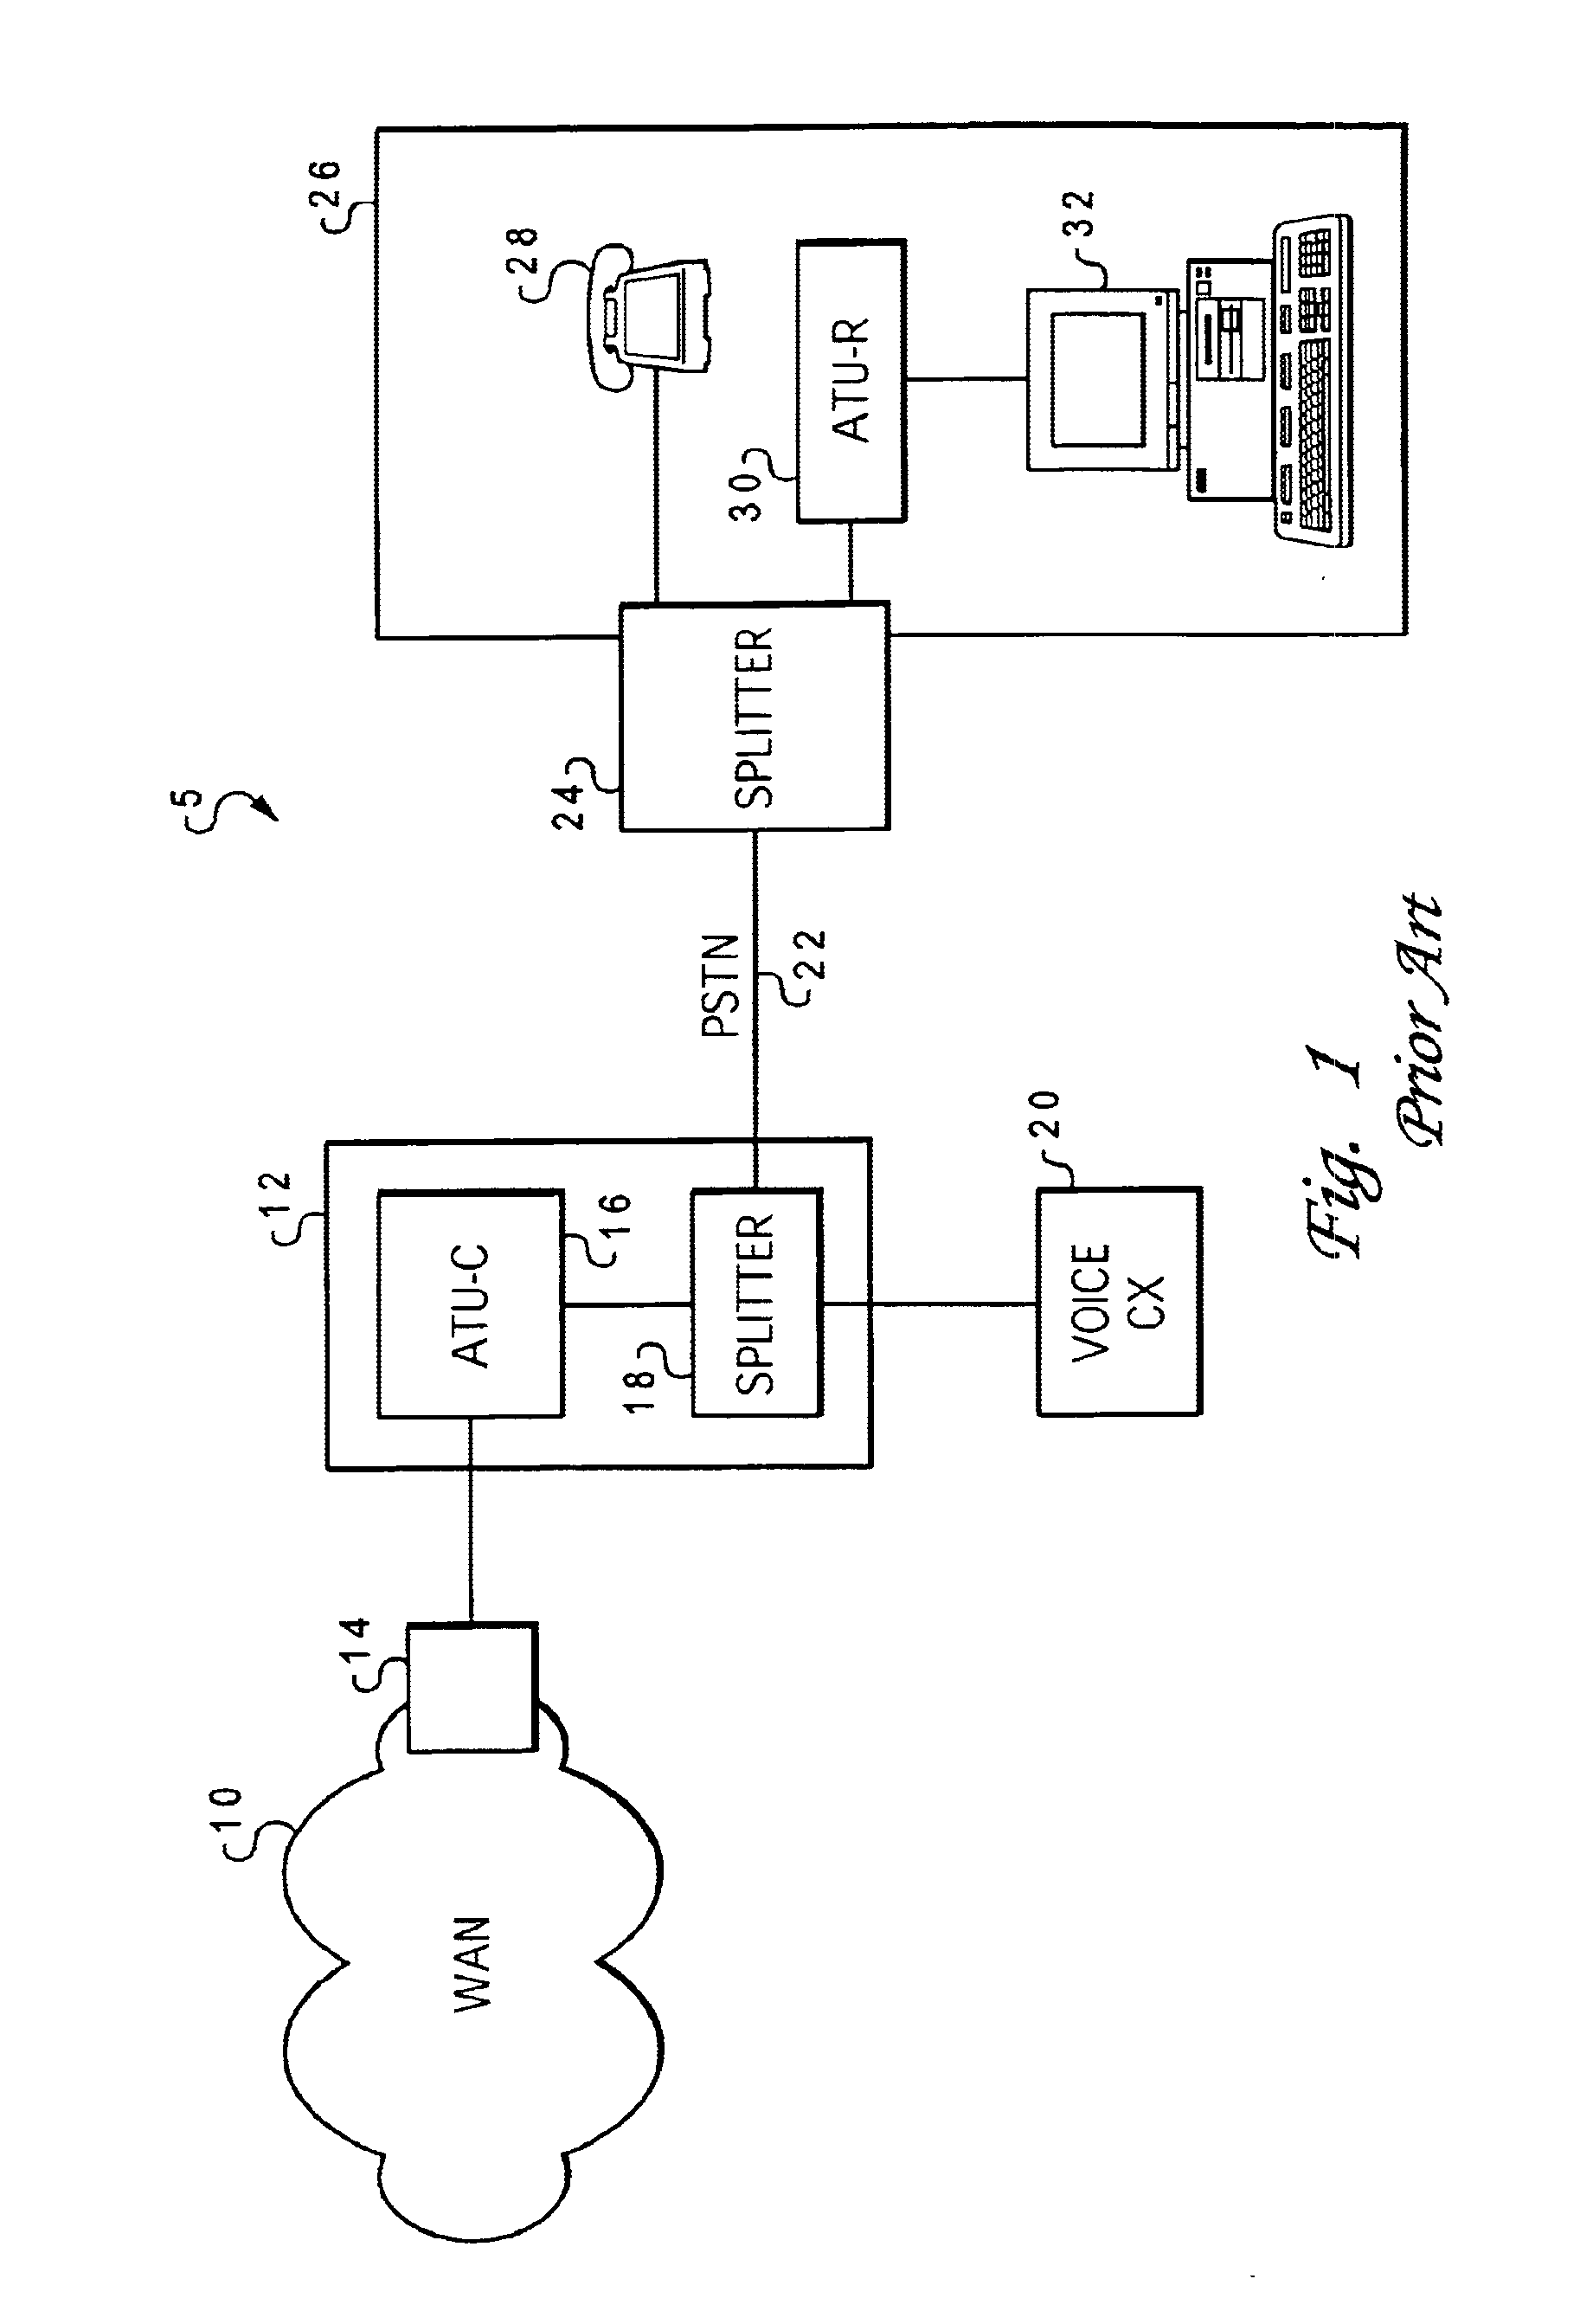 Method and system for dynamically inverting an asymmetric digital subscriber line (ADSL) system